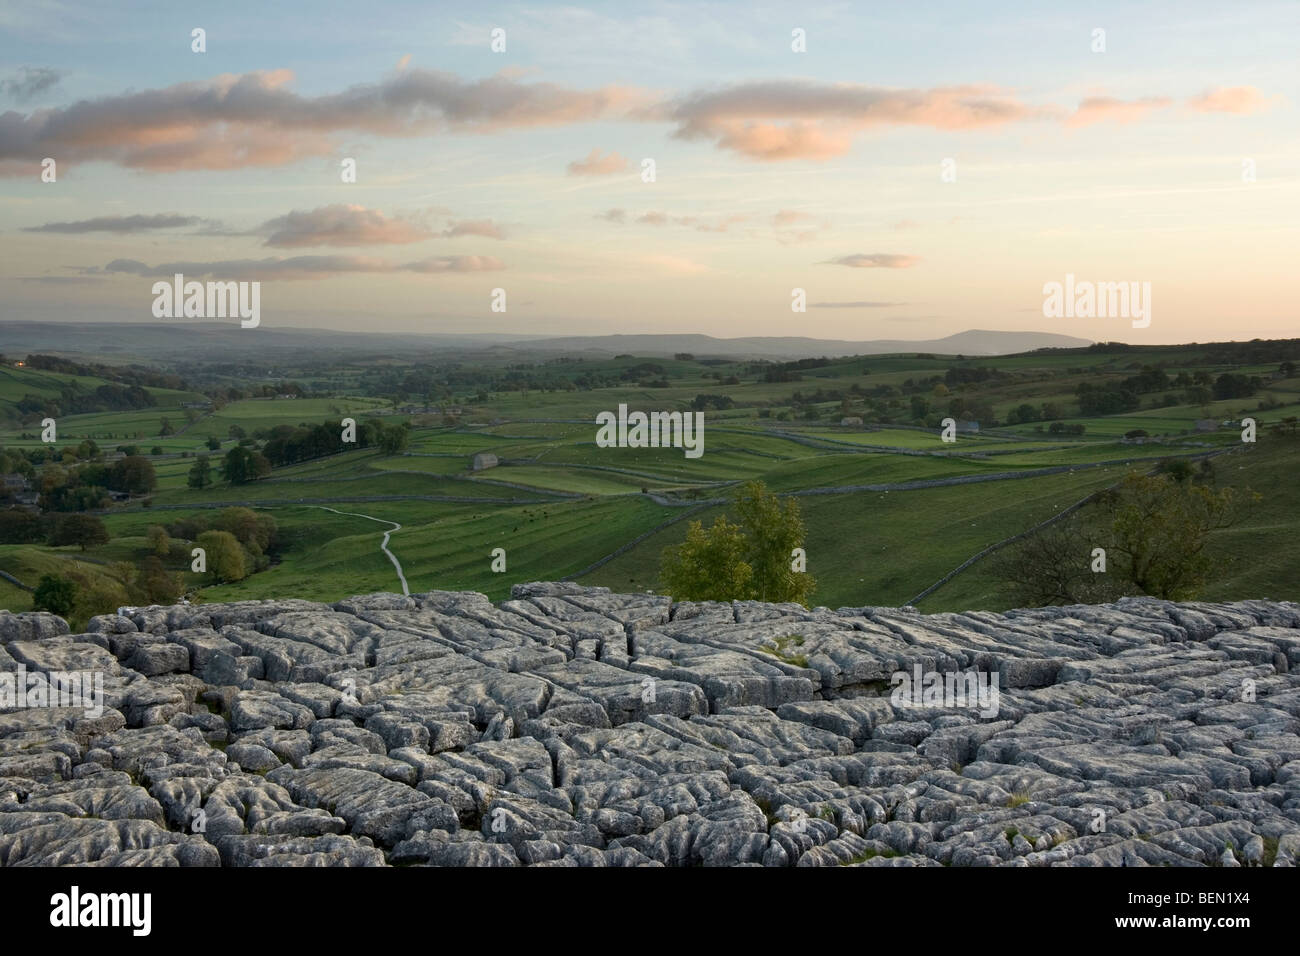 Sunset at Malham Cove, looking towards the village of Malham in the Yorkshire Dales National Park, North Yorkshire UK Stock Photo